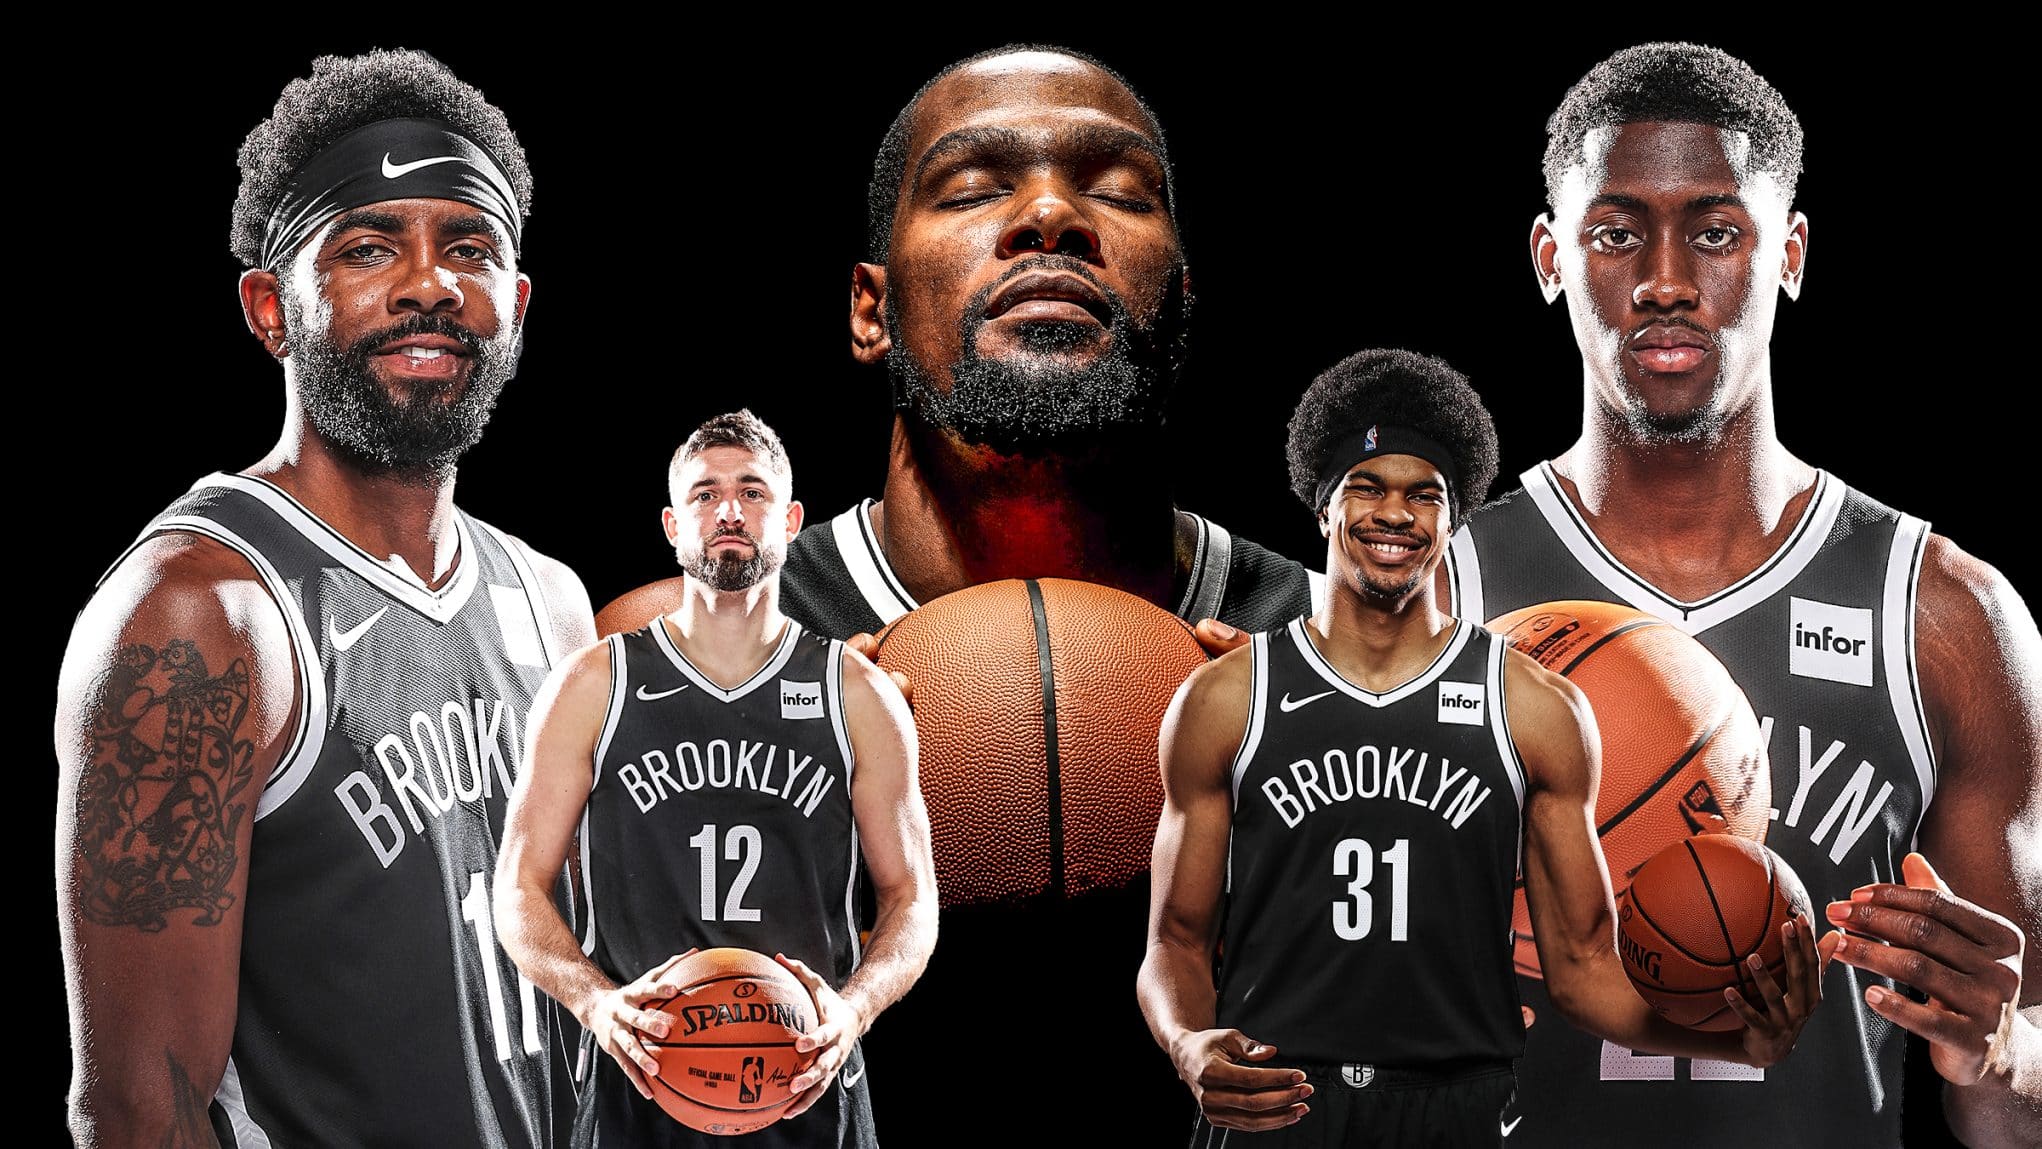 Brooklyn Nets Media Day, 4:16 a.m. ET: A tale of three acts